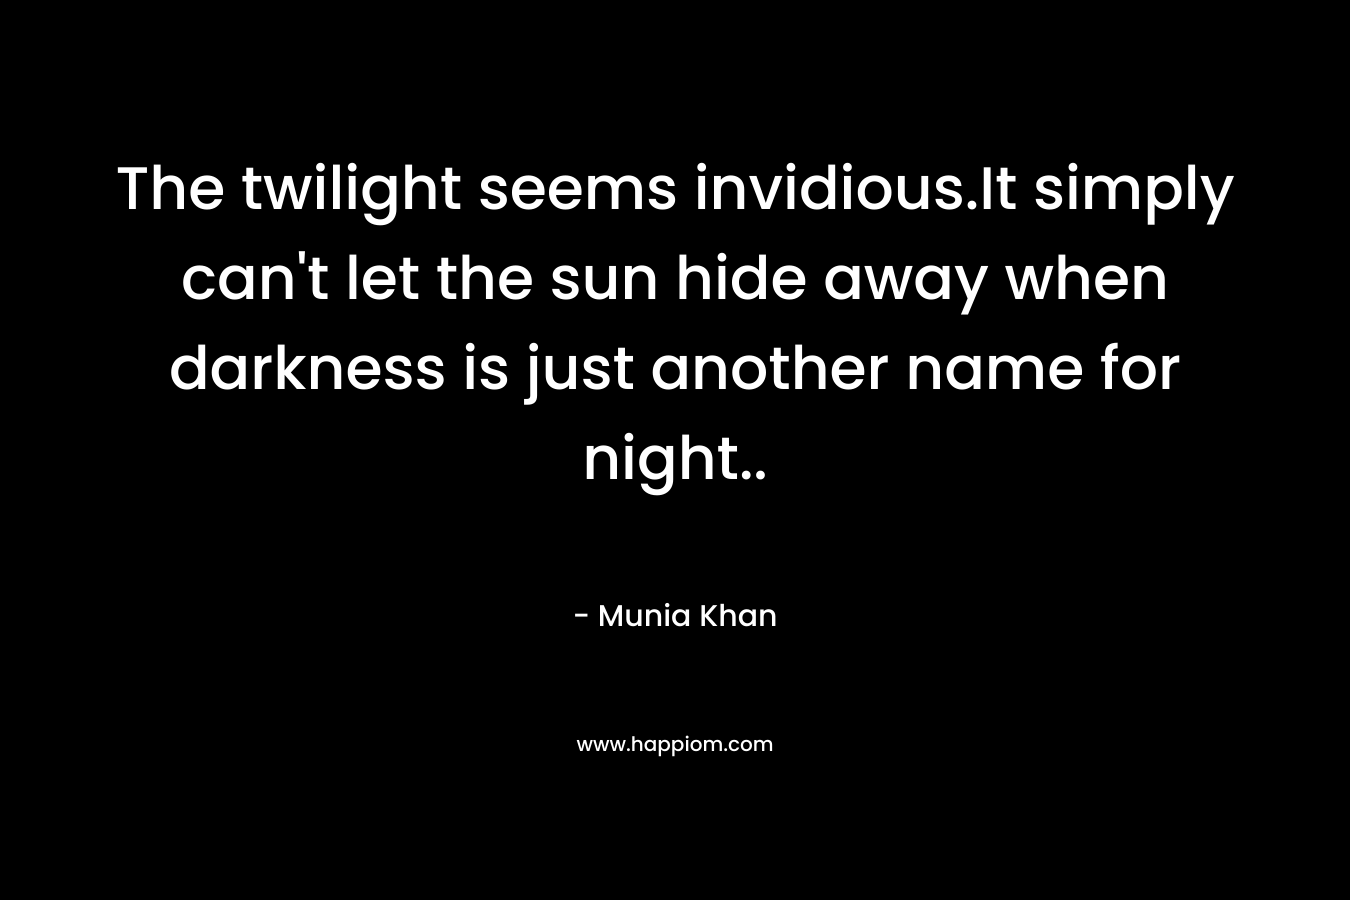 The twilight seems invidious.It simply can't let the sun hide away when darkness is just another name for night..